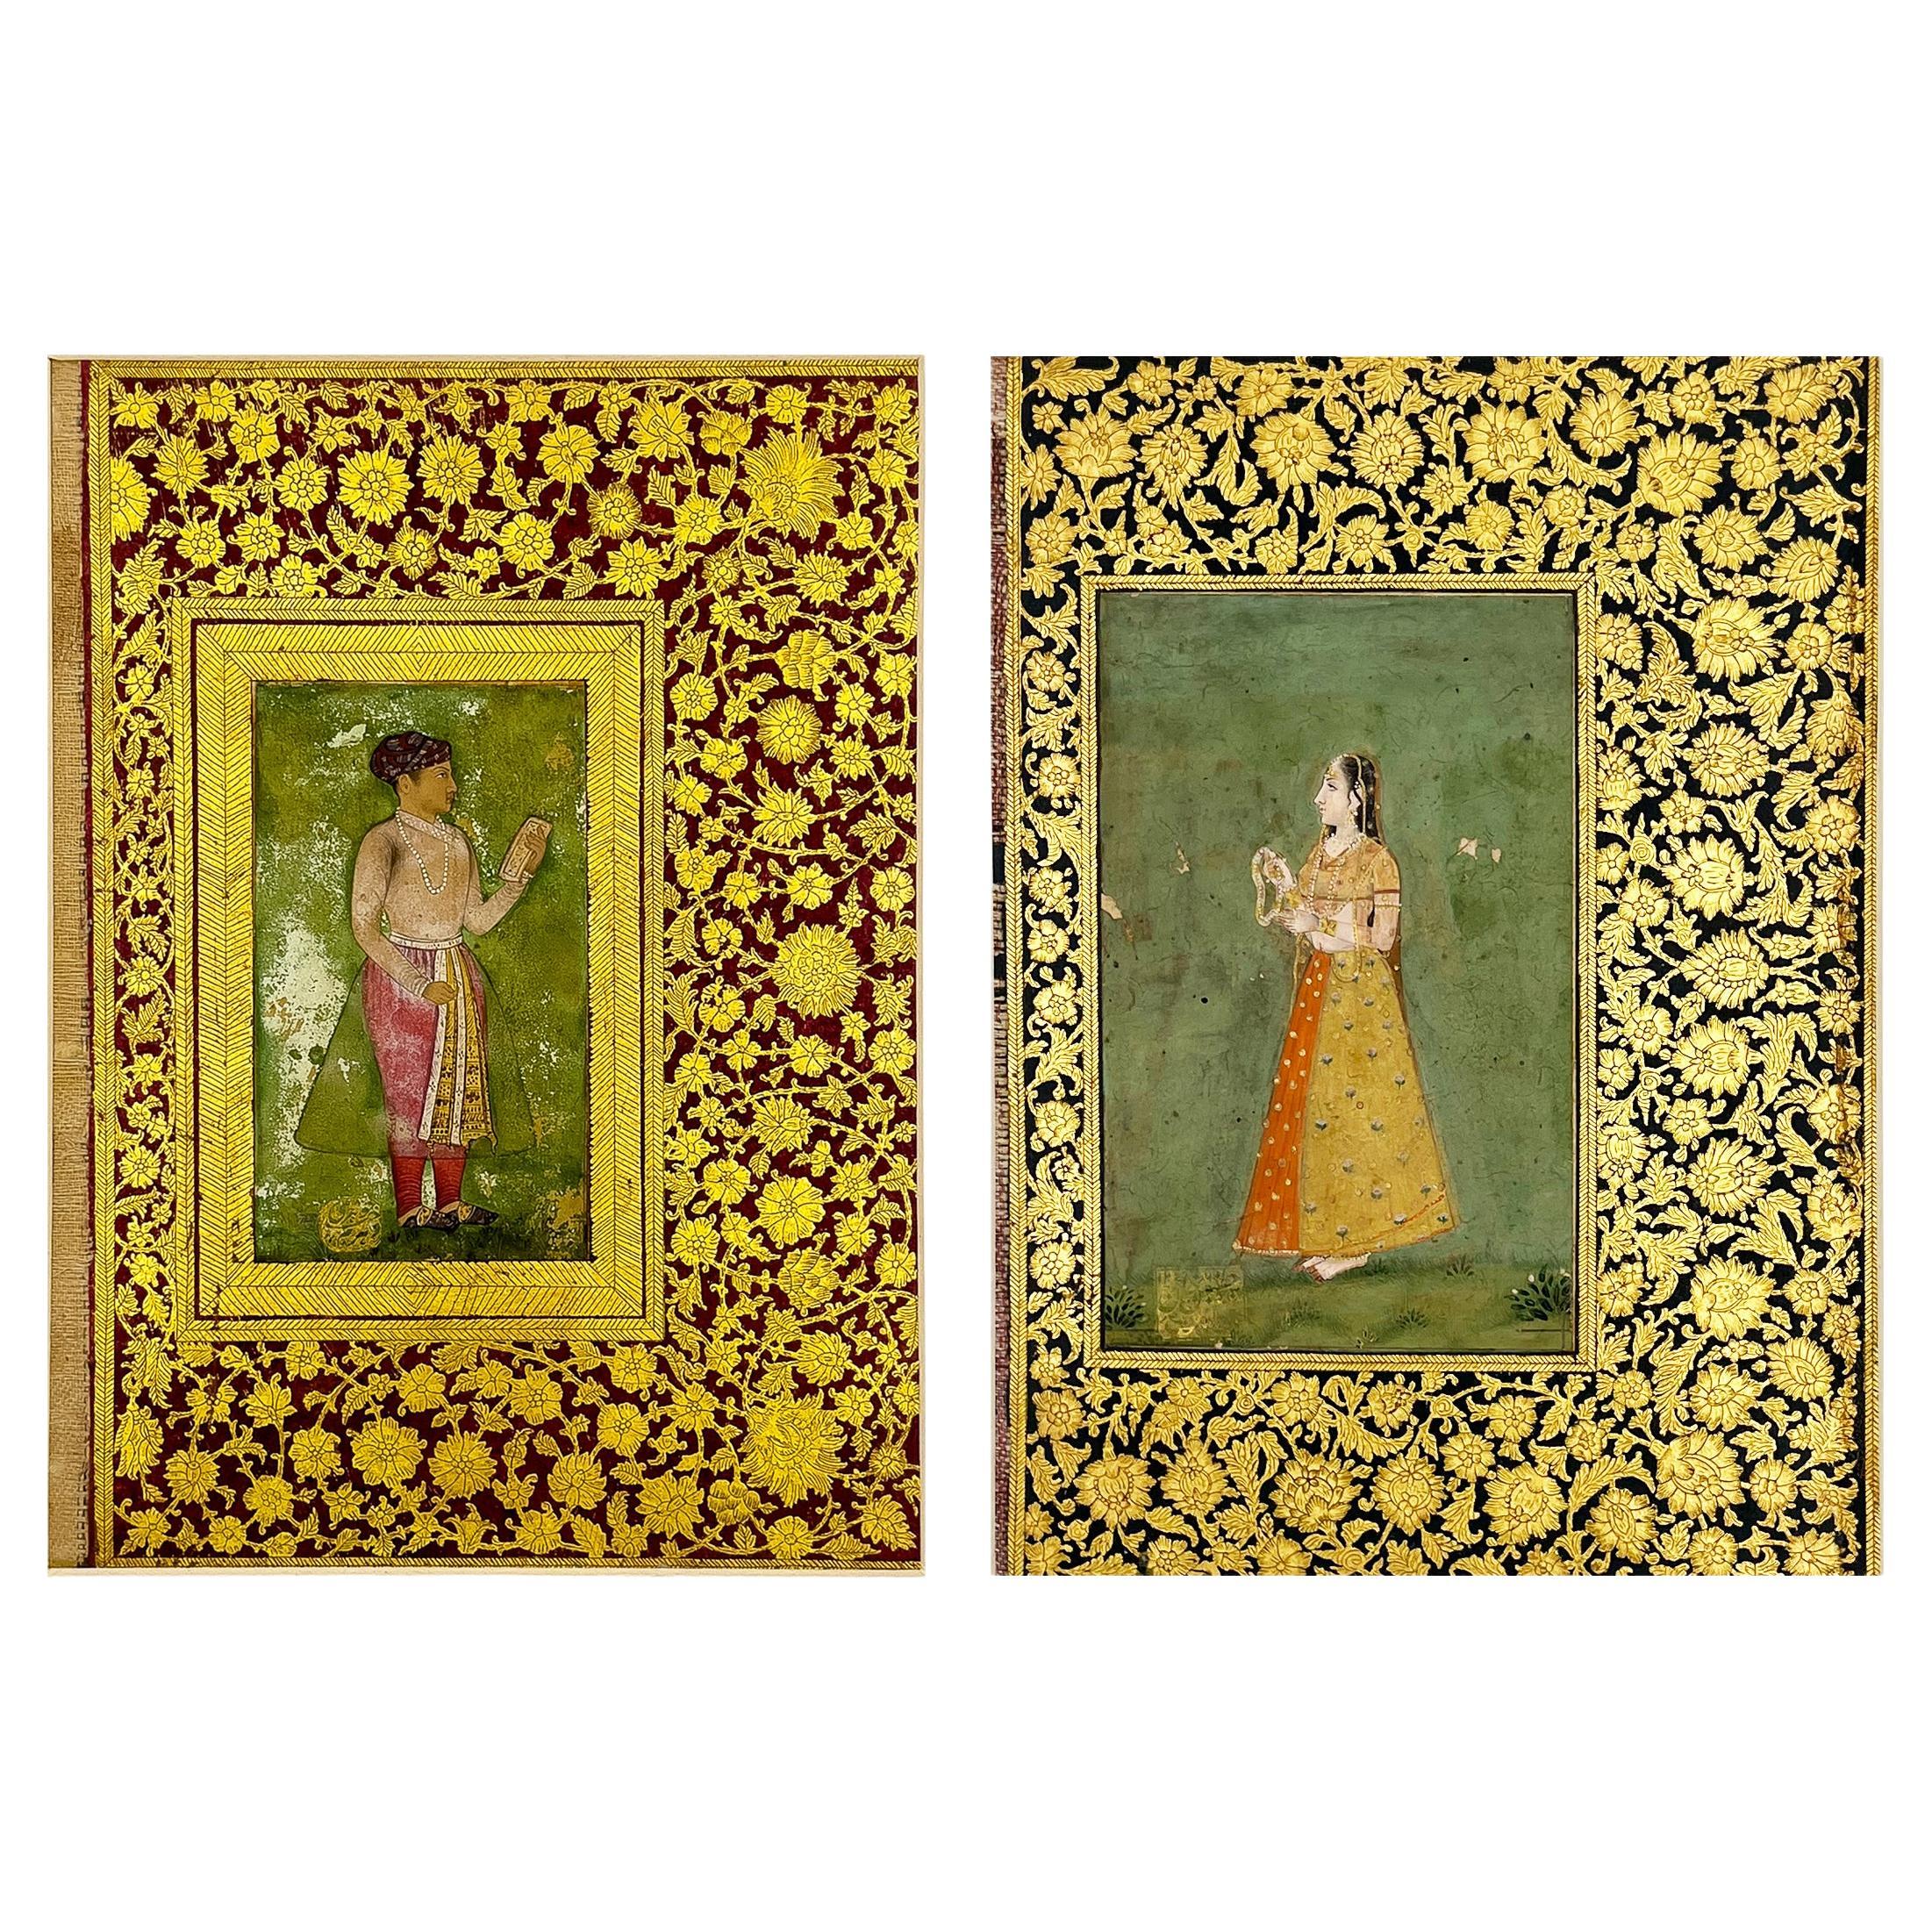 Pair of Red, Black and Gold Indian Album Pages, Deccan, Bijapur or Golconda, C For Sale